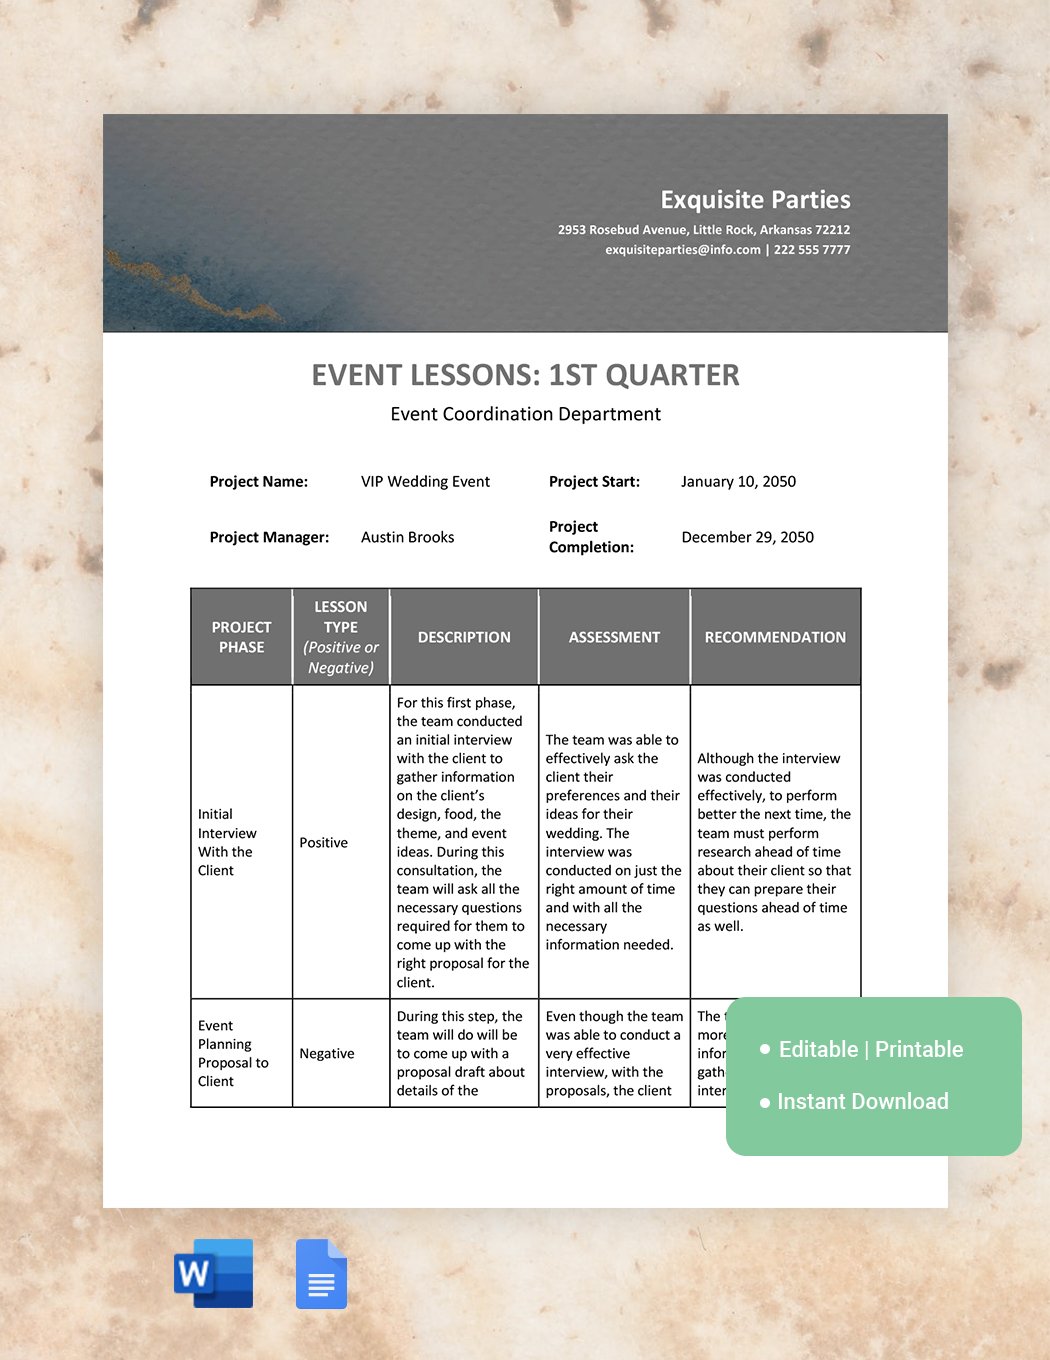 Free Event Lessons Learned Template in Word, Google Docs